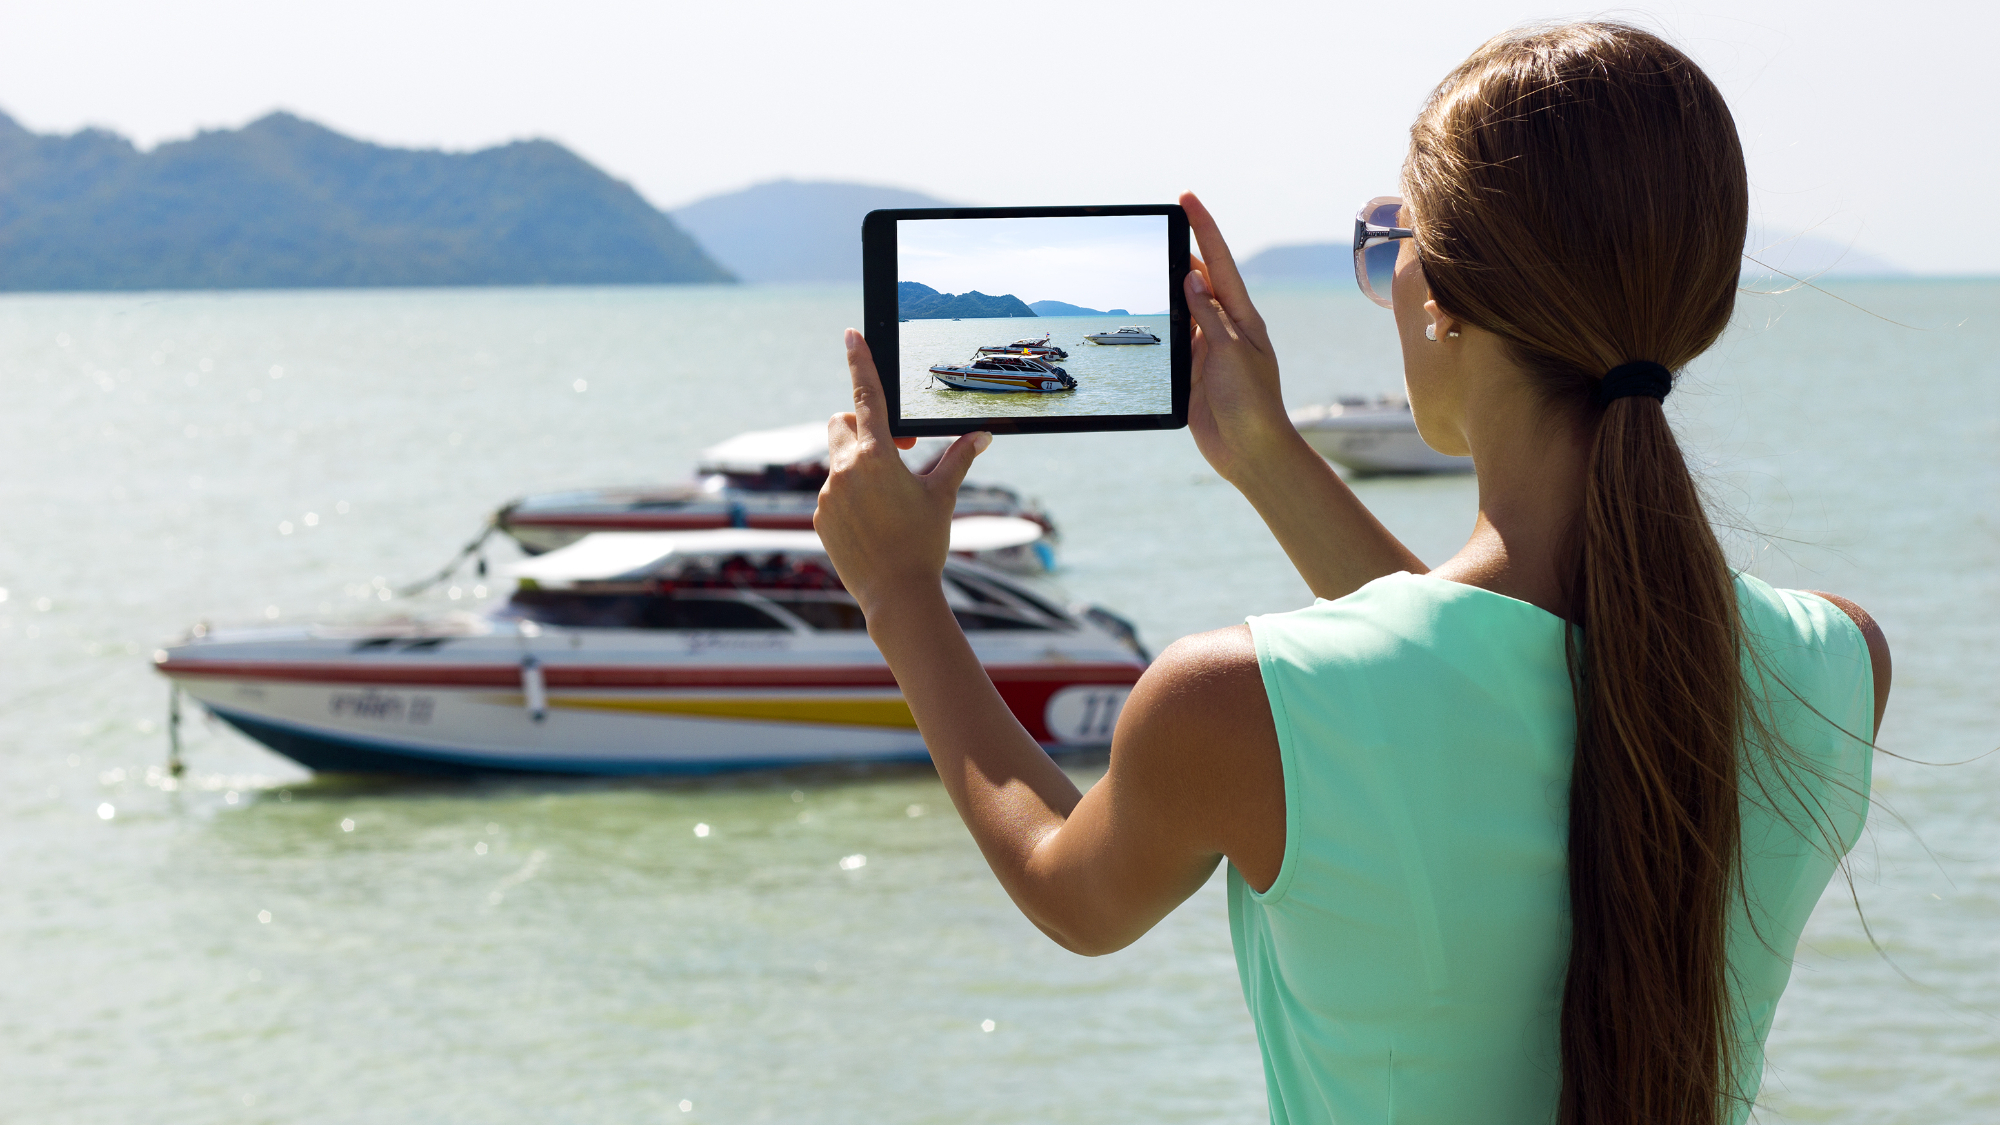 Woman using iPad to take a photo of a boat